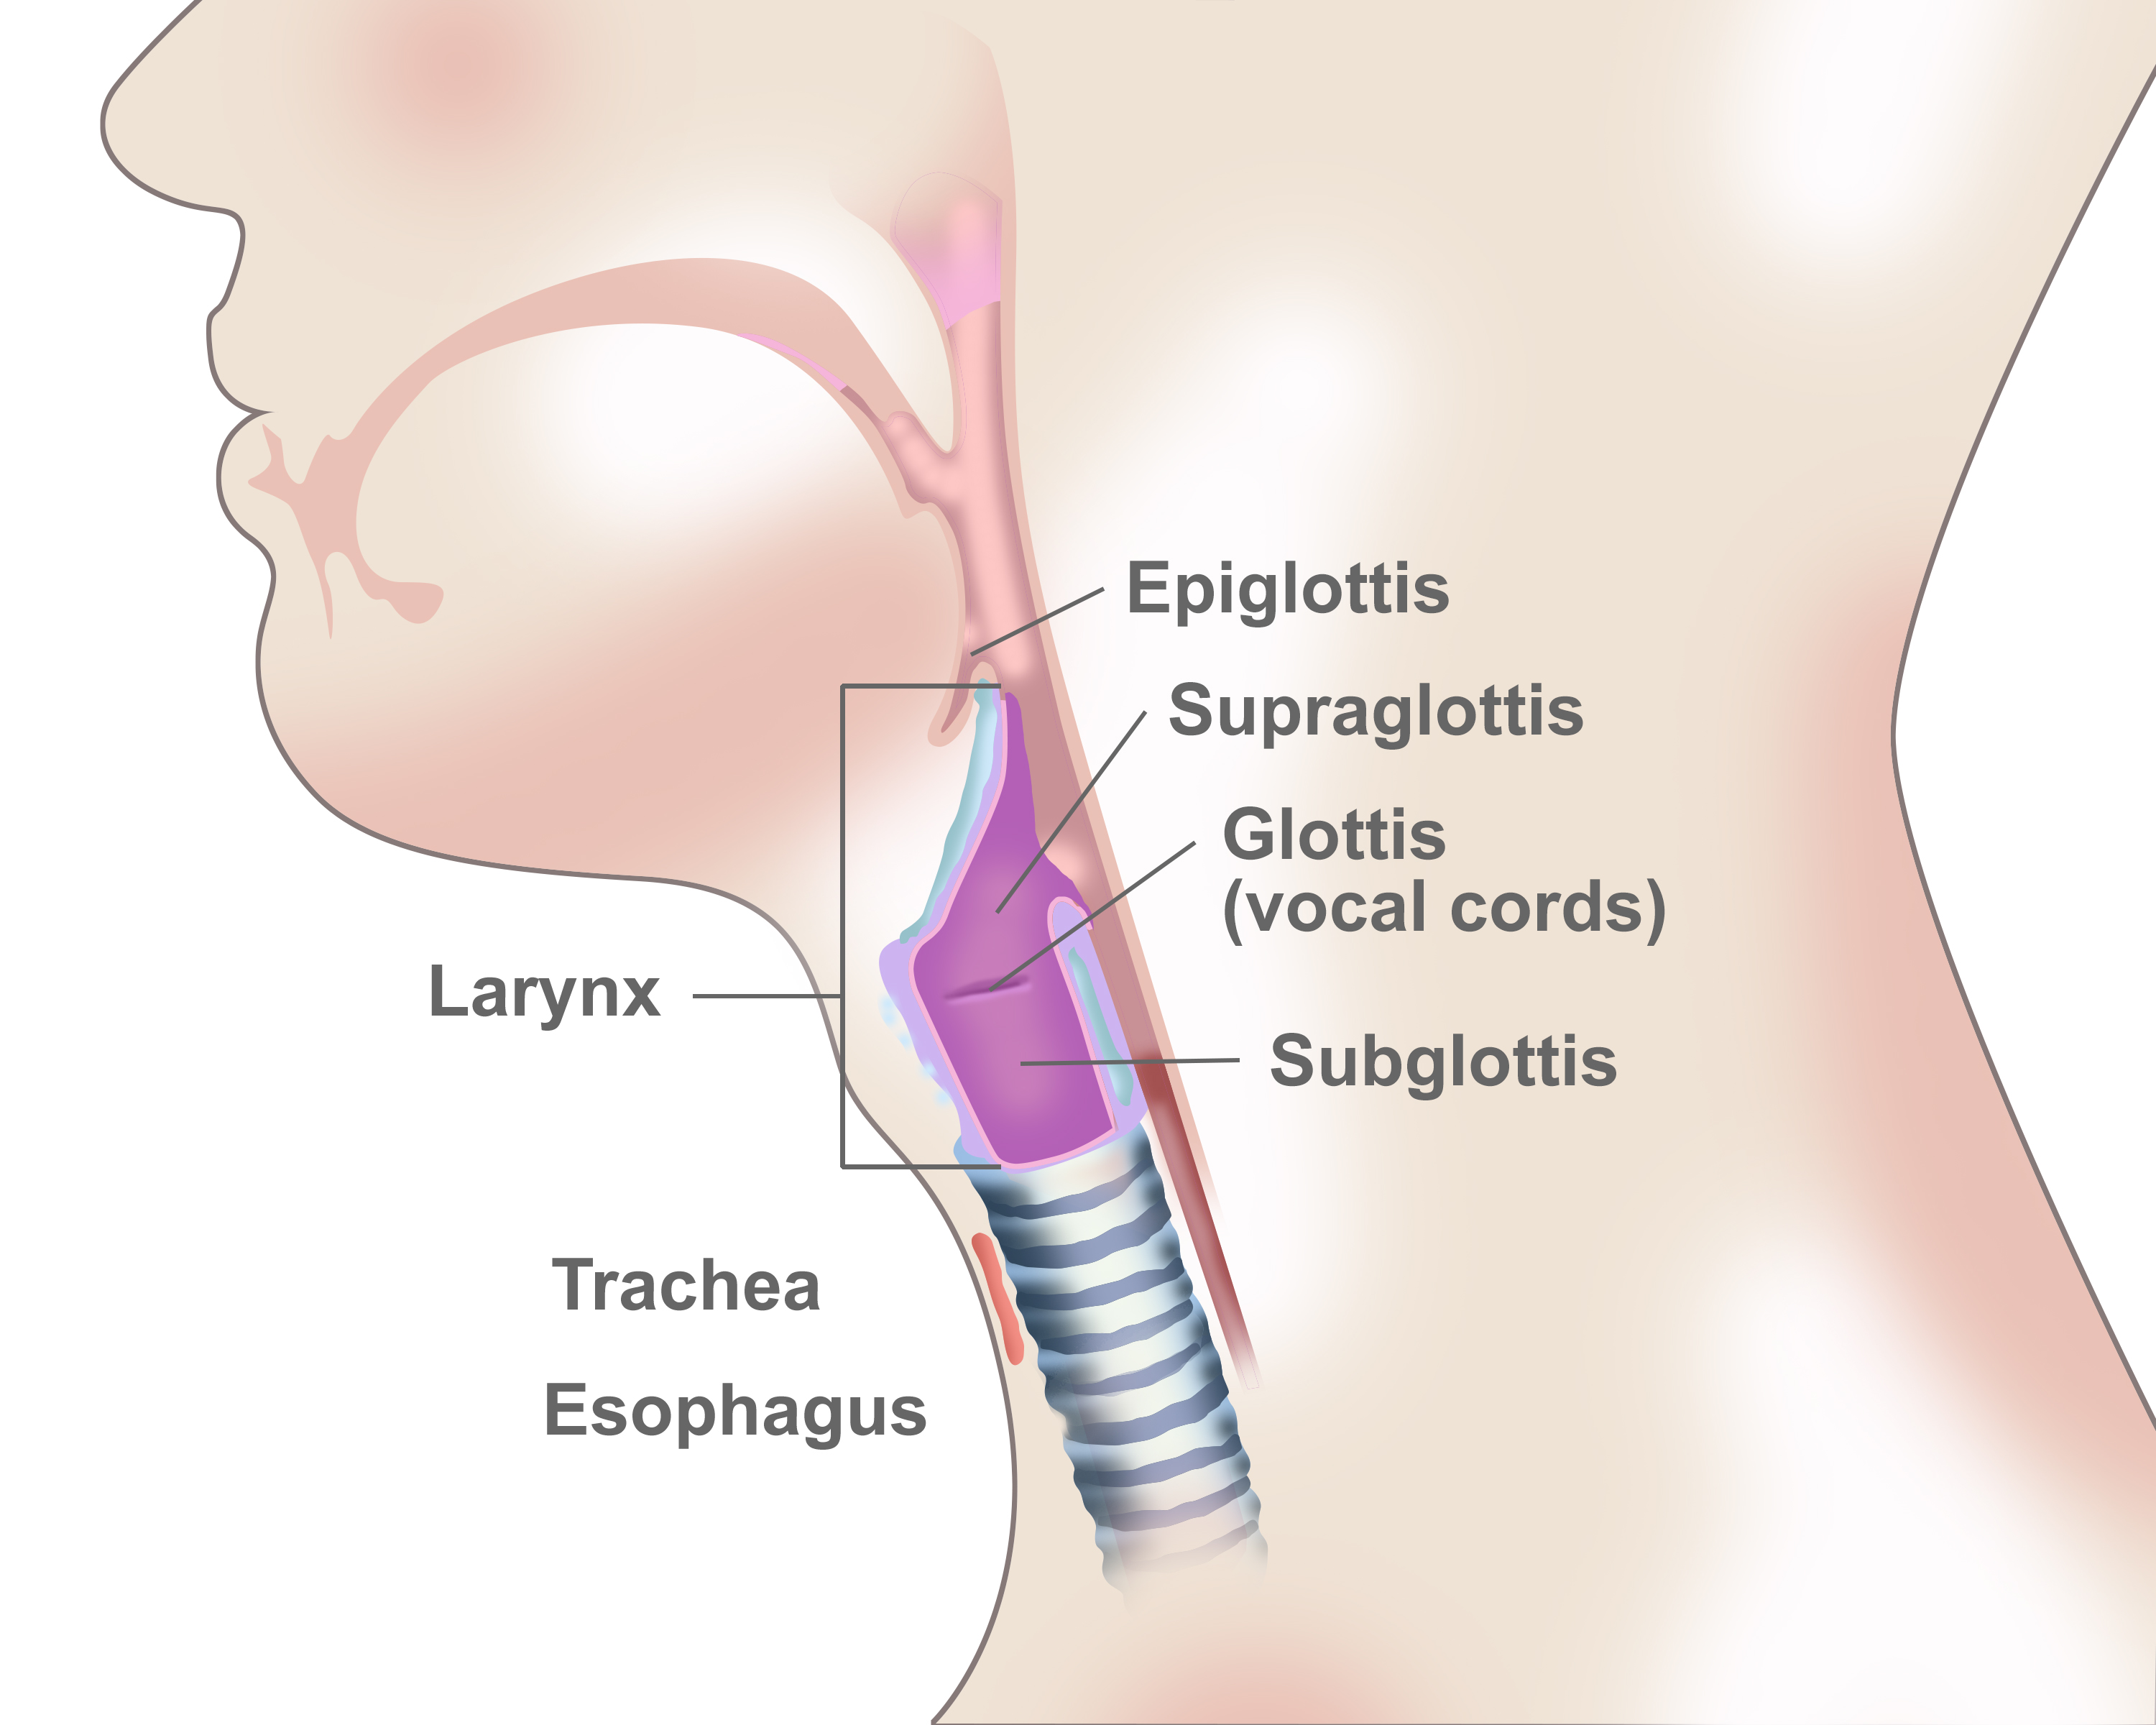 evolve case study answers laryngeal cancer